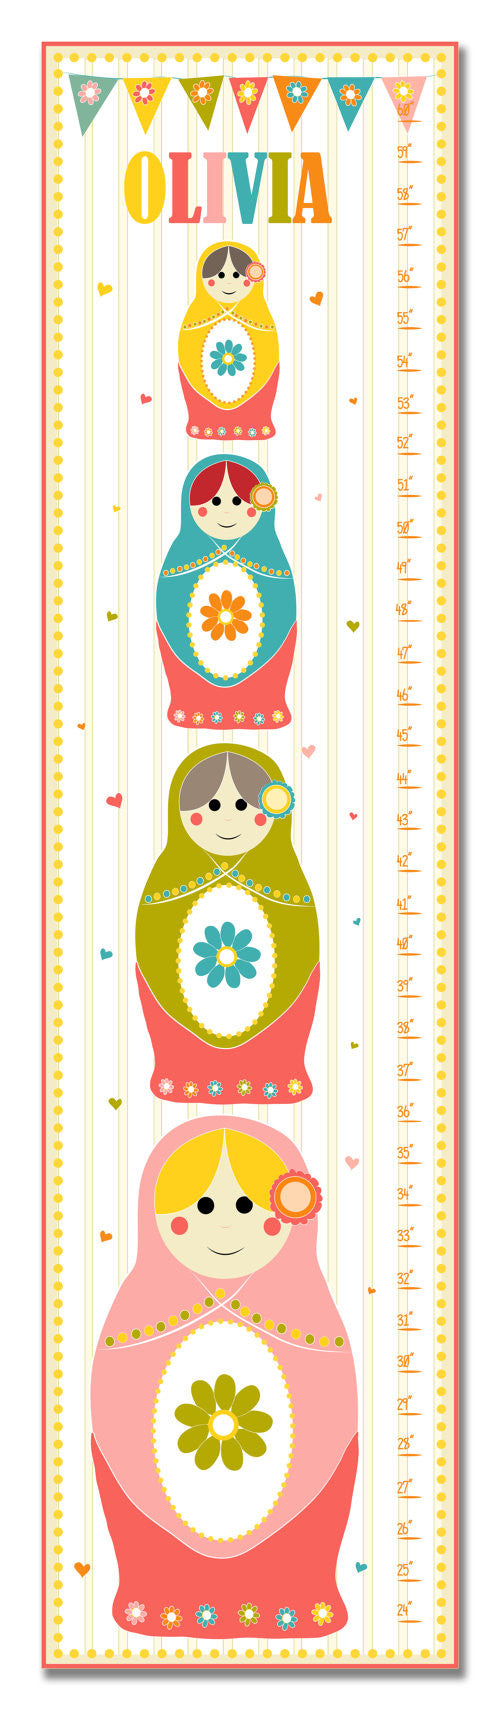 Nesting Dolls Personalized Growth Chart